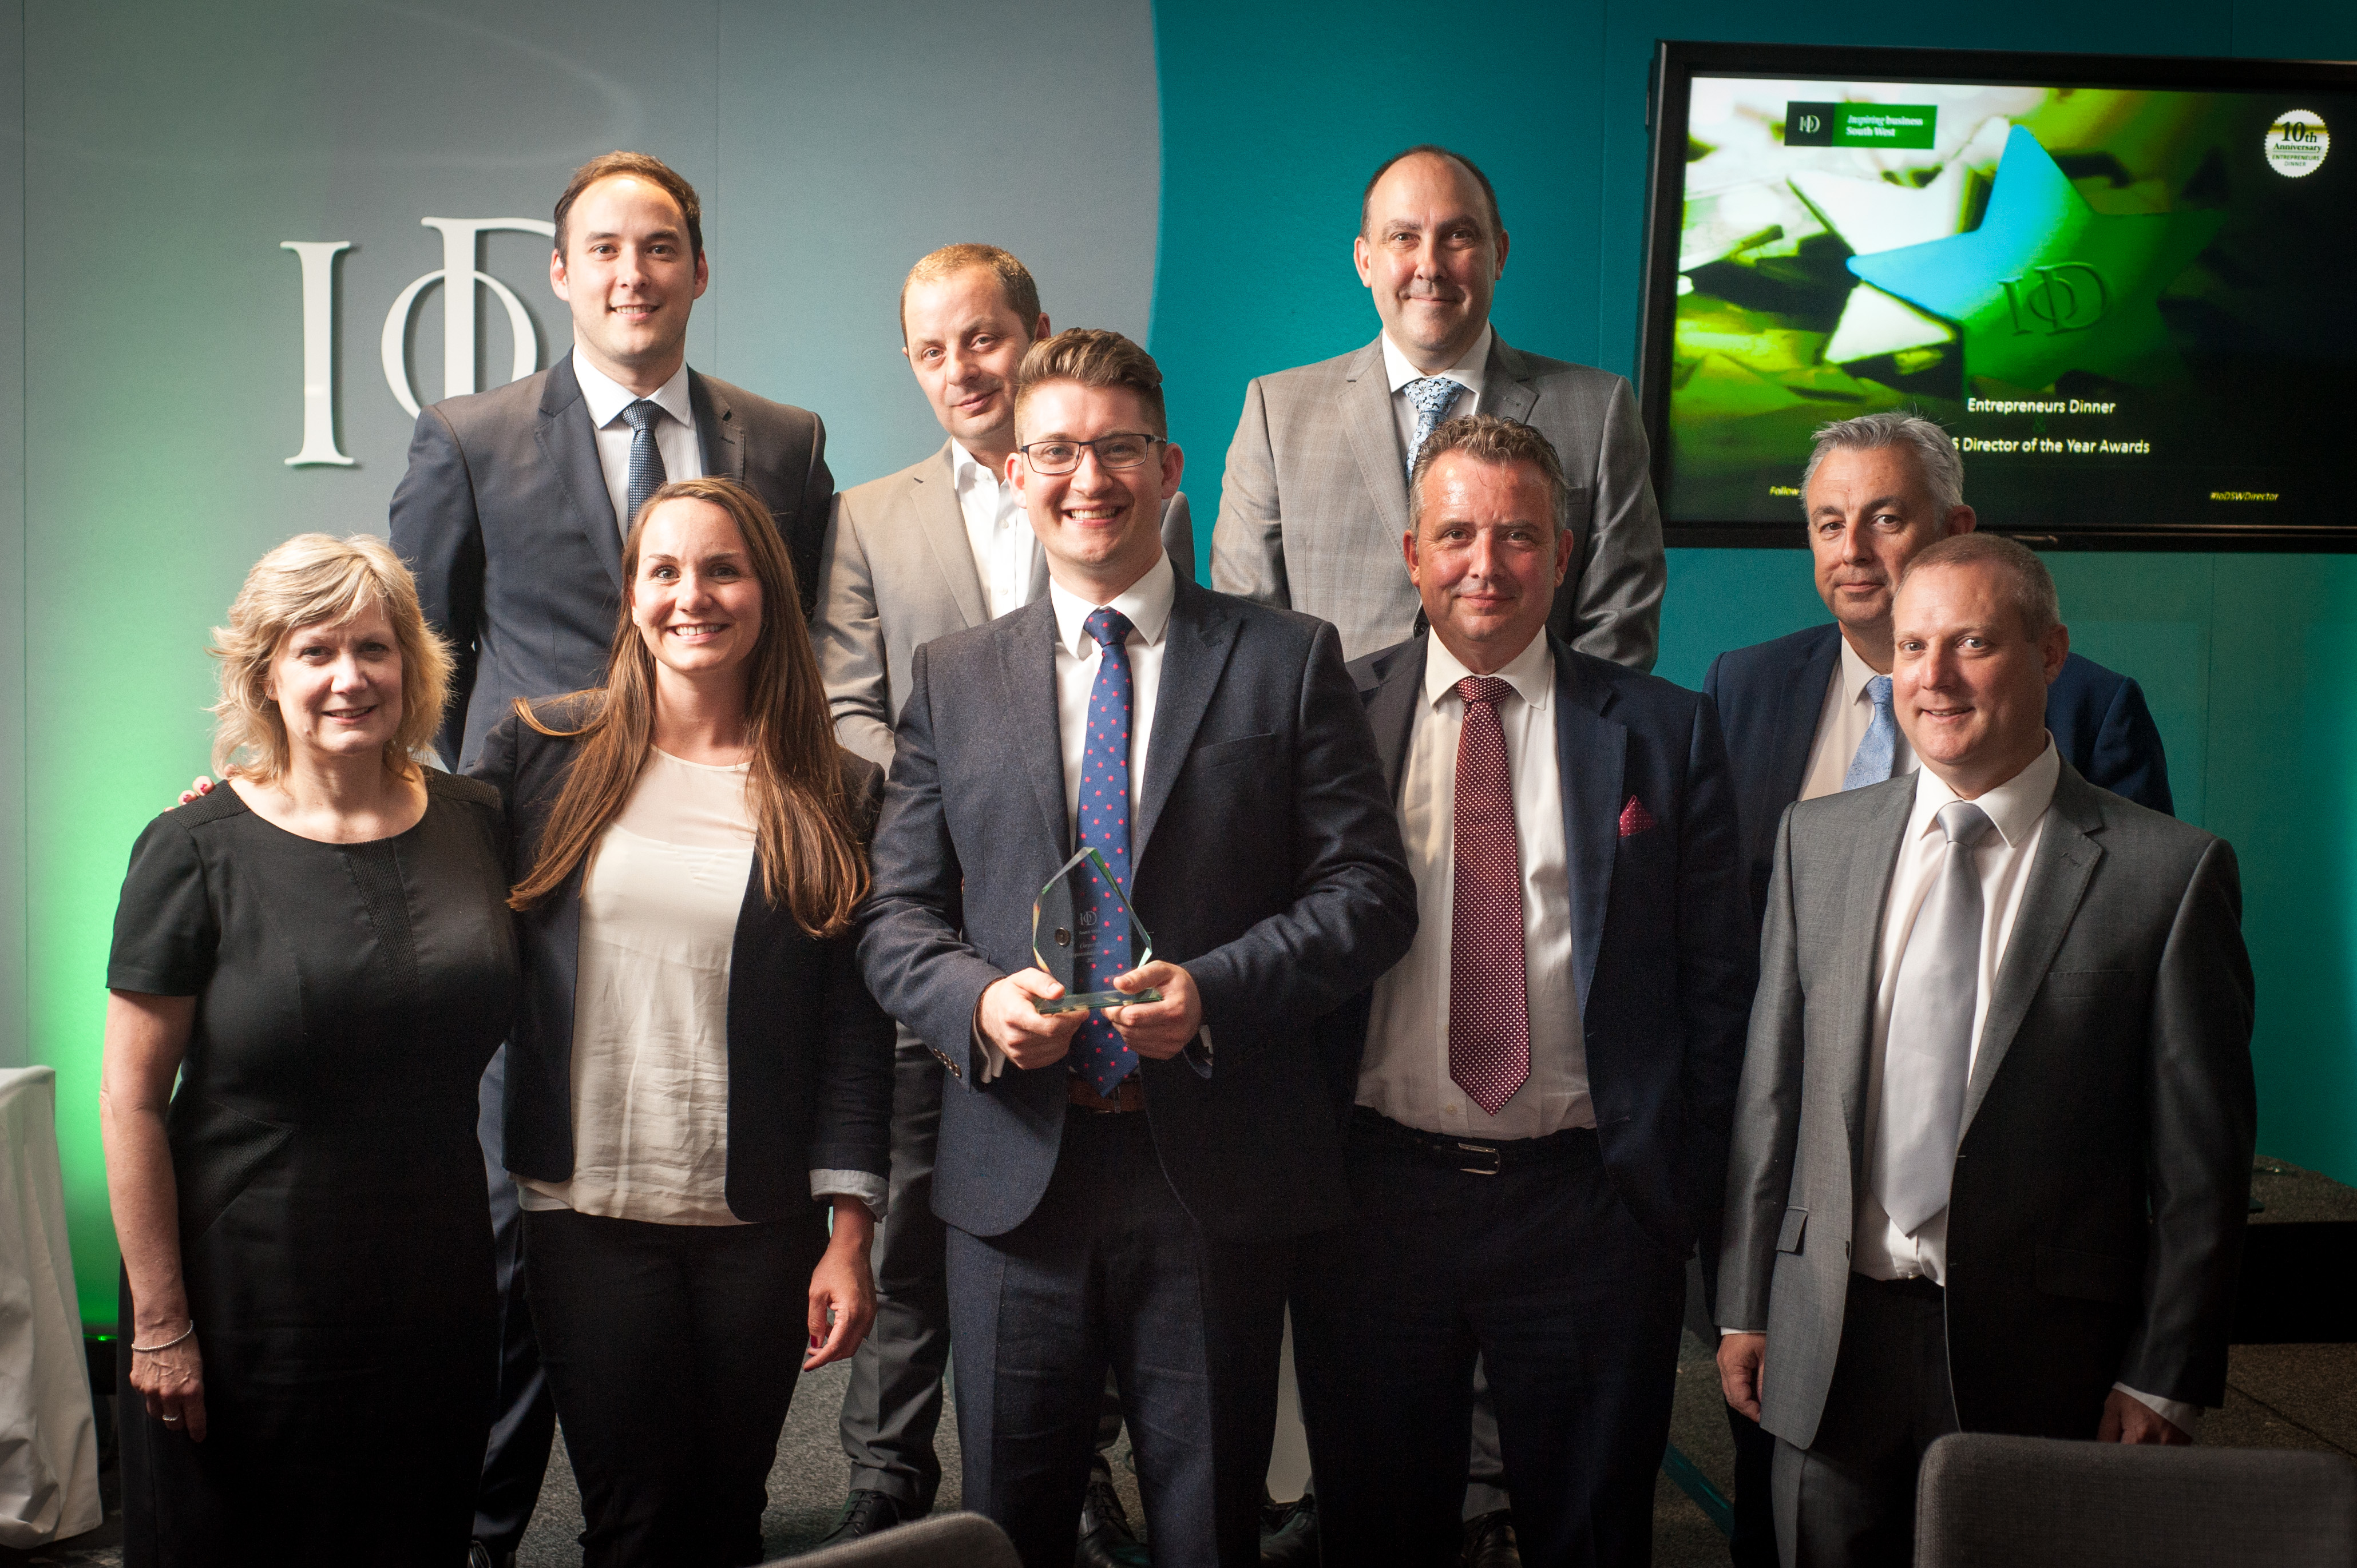 Swindon Business News Photo Gallery: IoD South West Director of the Year Awards